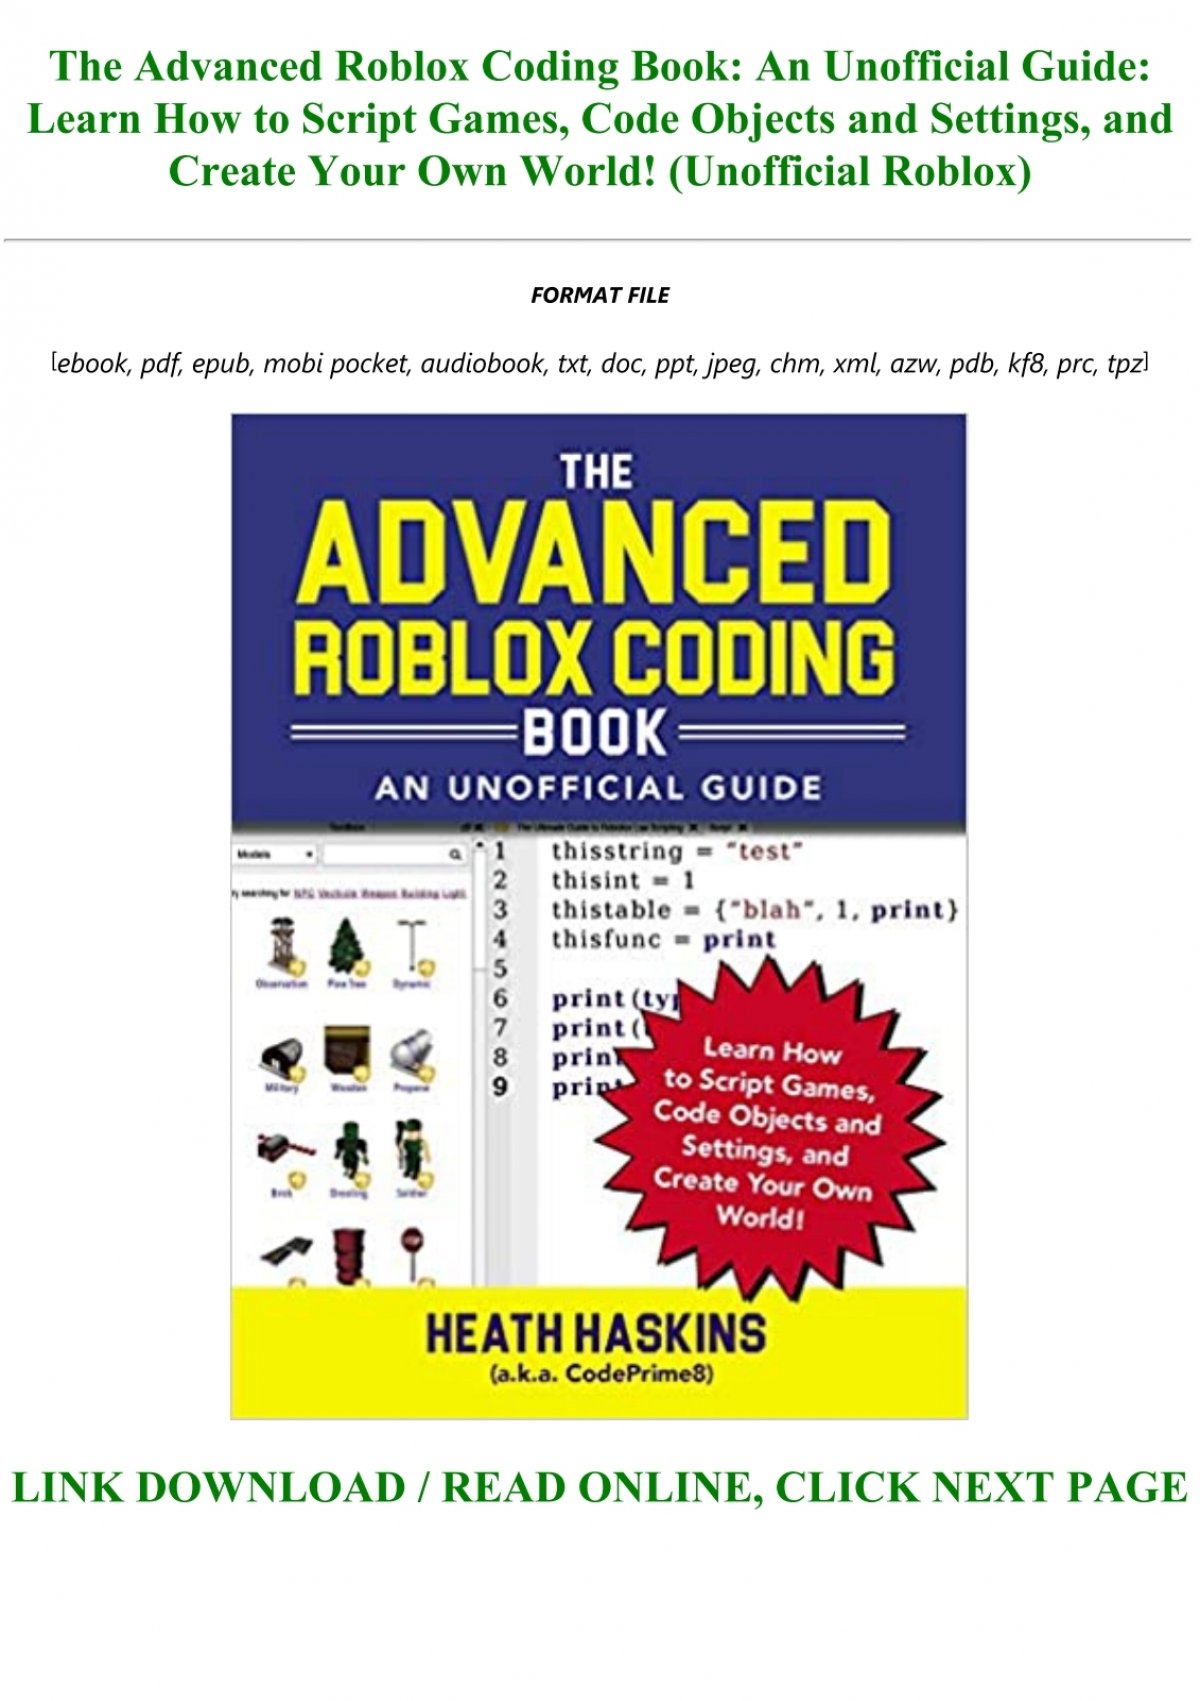 Download E B O O K The Advanced Roblox Coding Book An Unofficial Guide Learn How To Script Games Code Objects And Settings And Create Your Own World Unofficial Roblox Full - the advanced roblox coding book an unofficial guide pdf